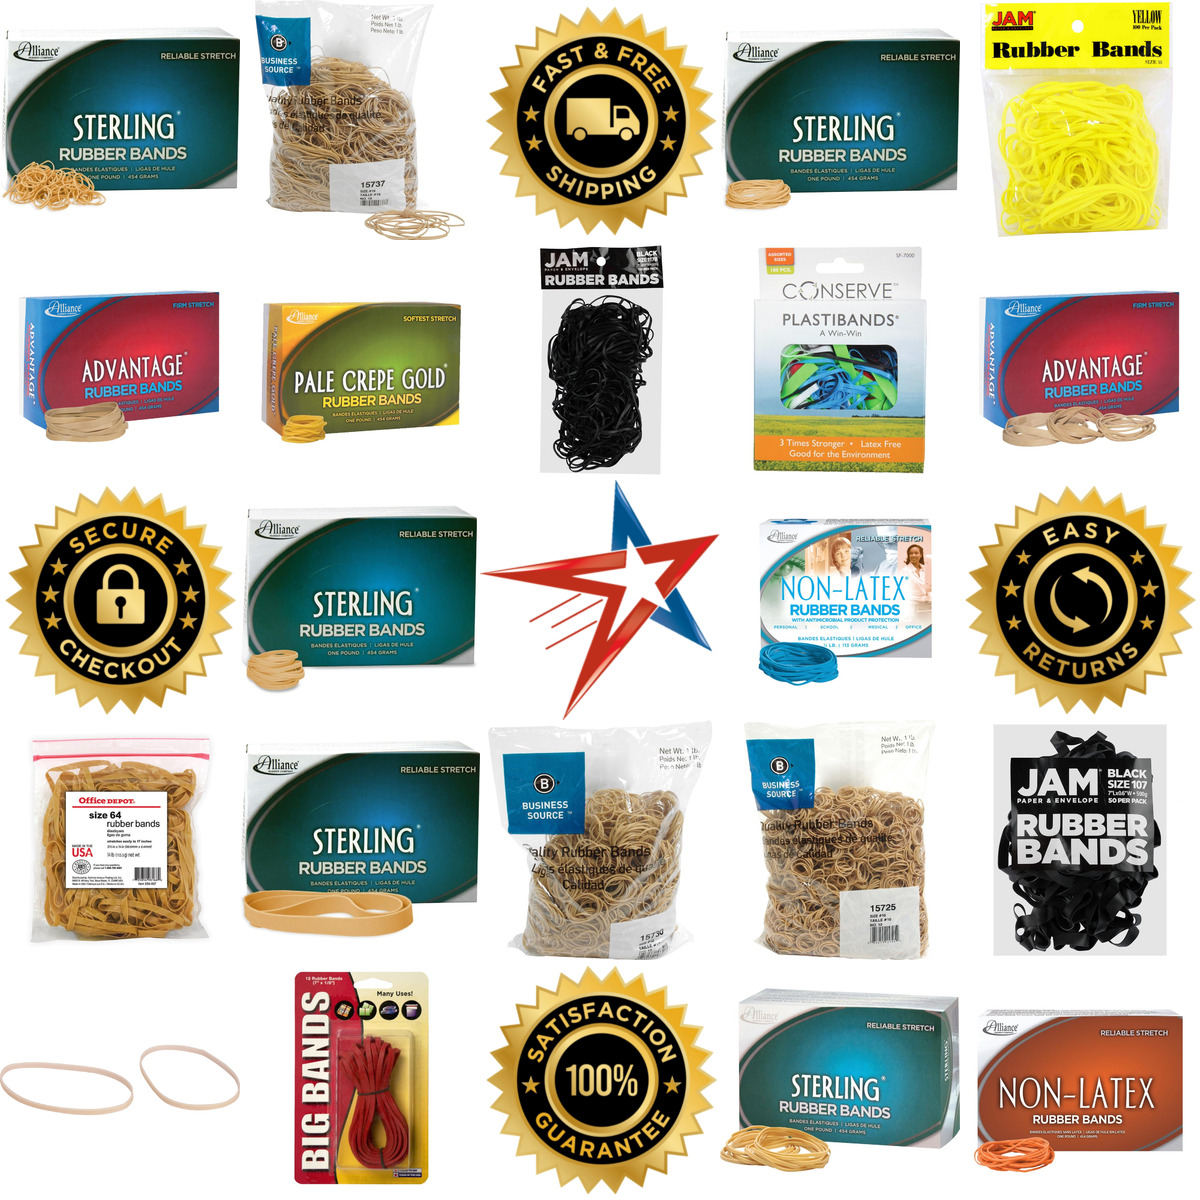 A selection of Rubber Bands products on GoVets